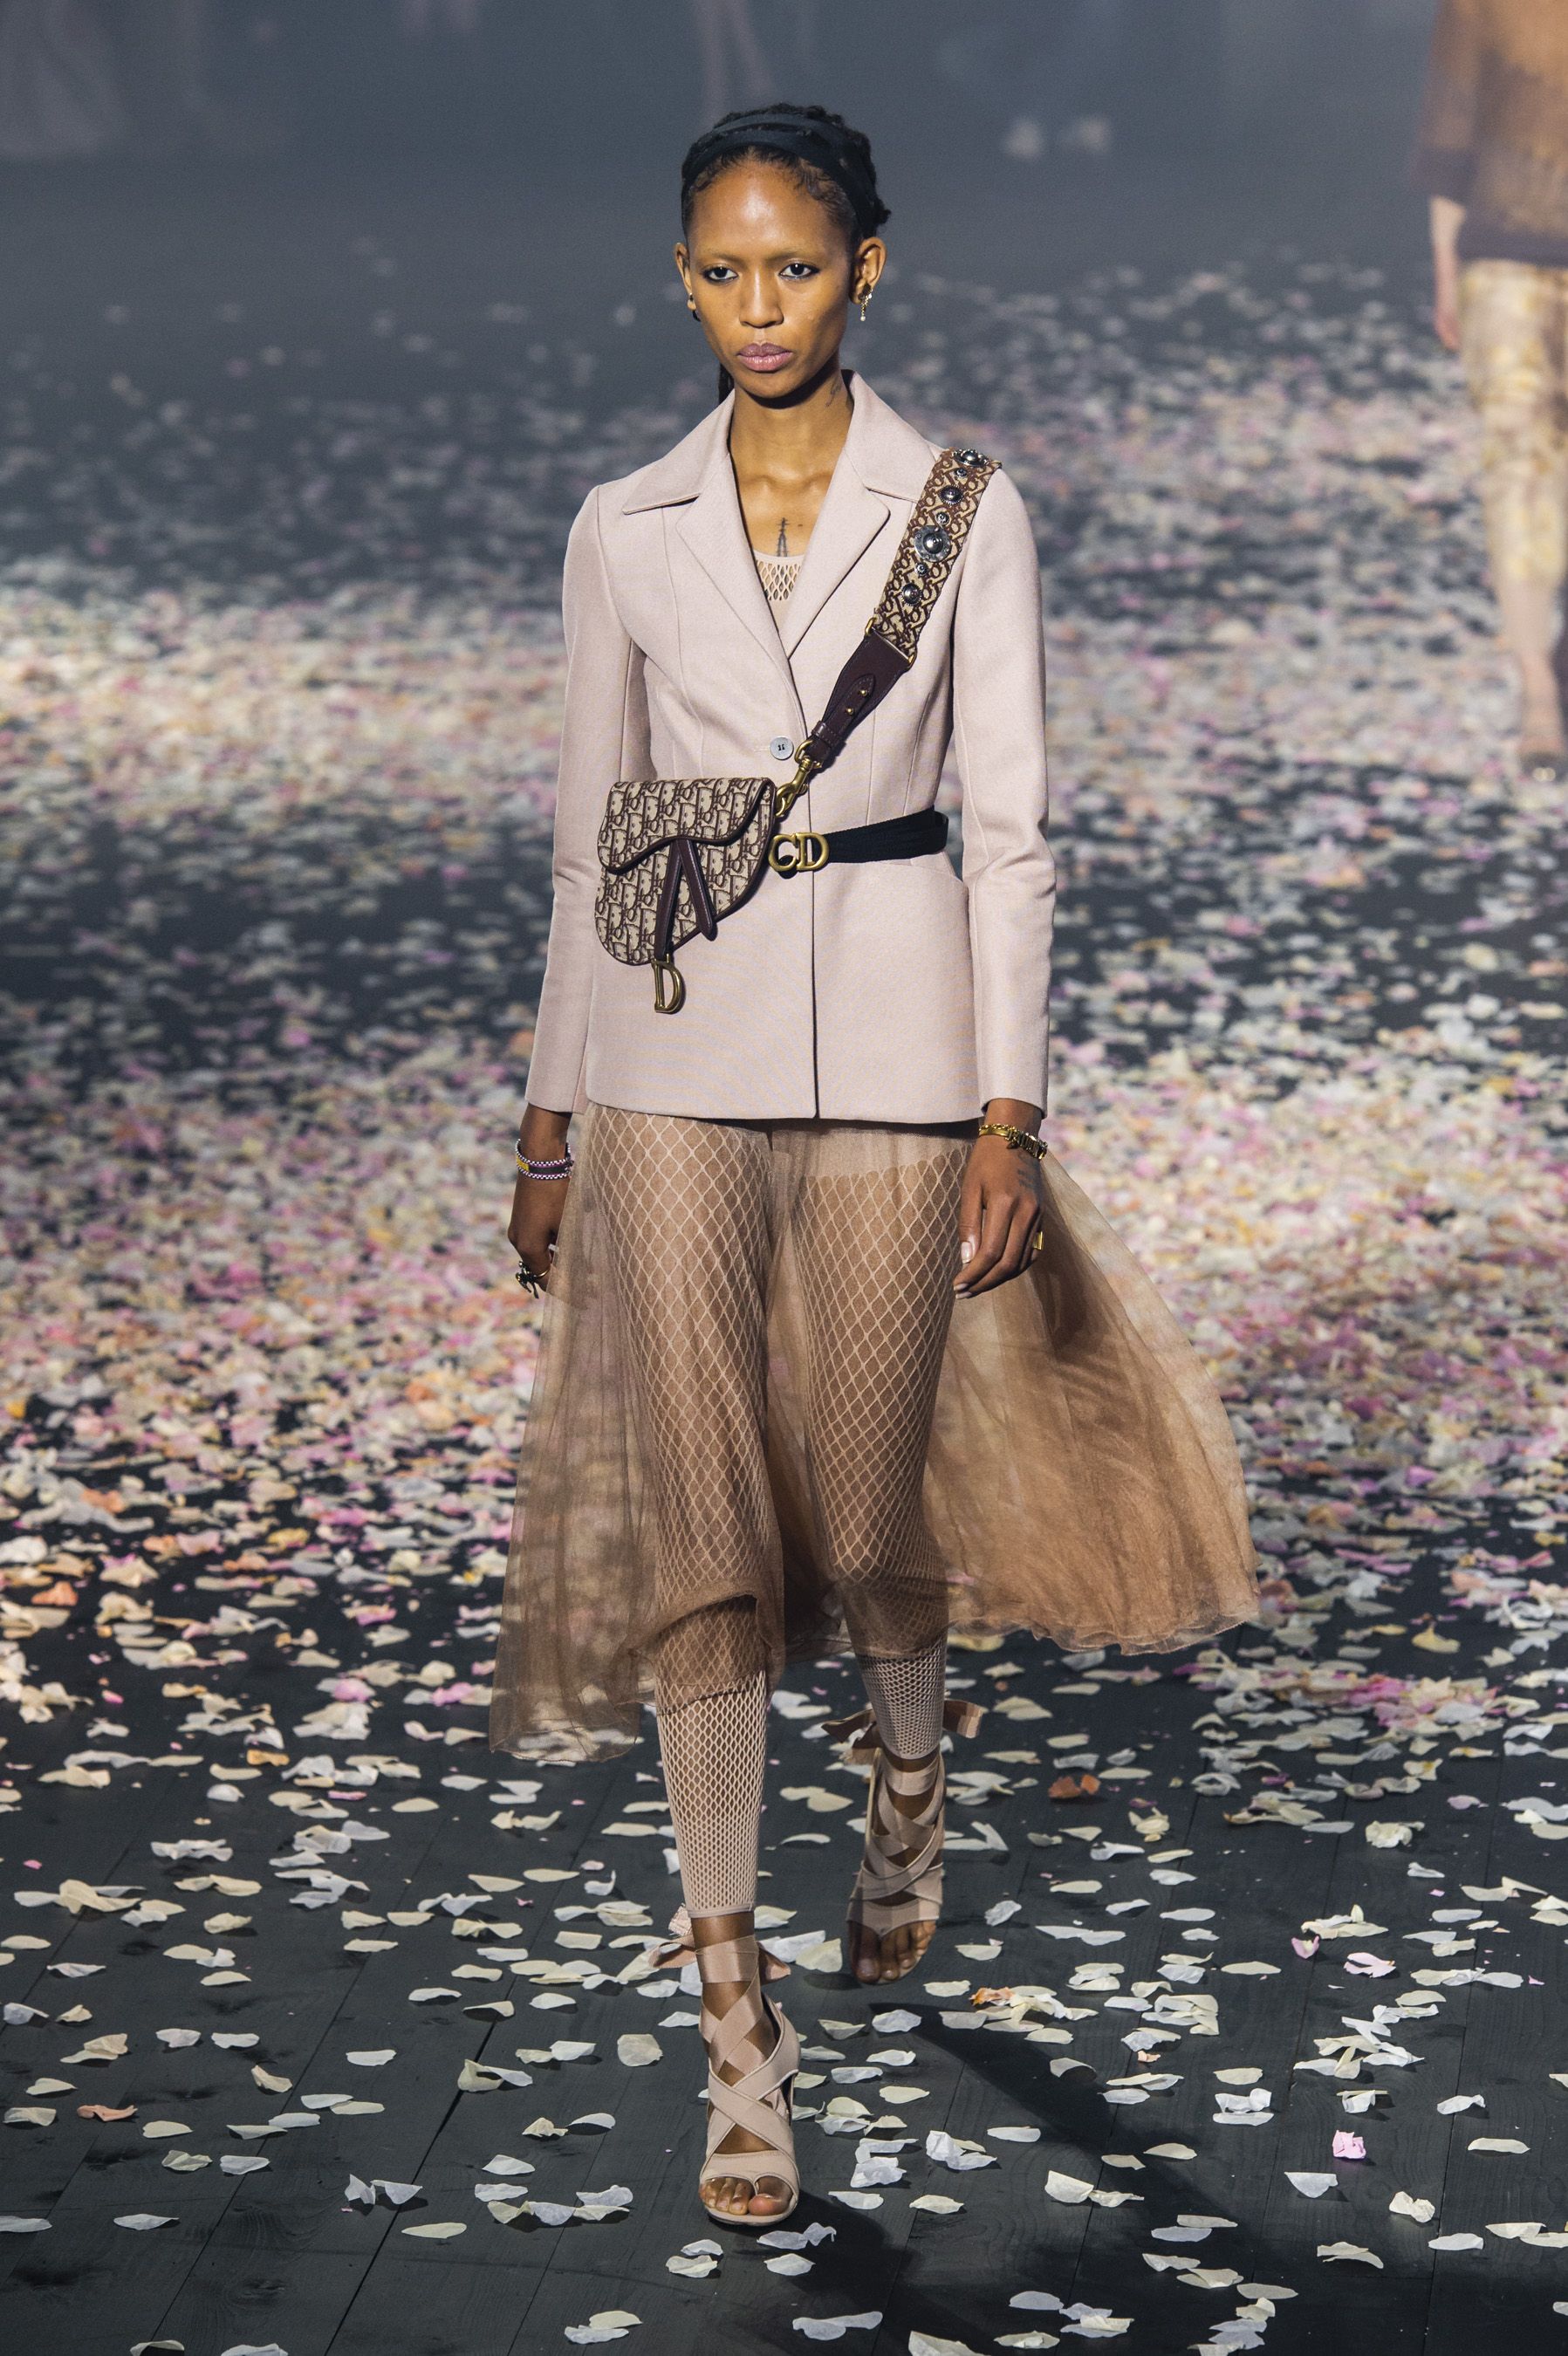 Christian Dior's Spring 2019 Collection 